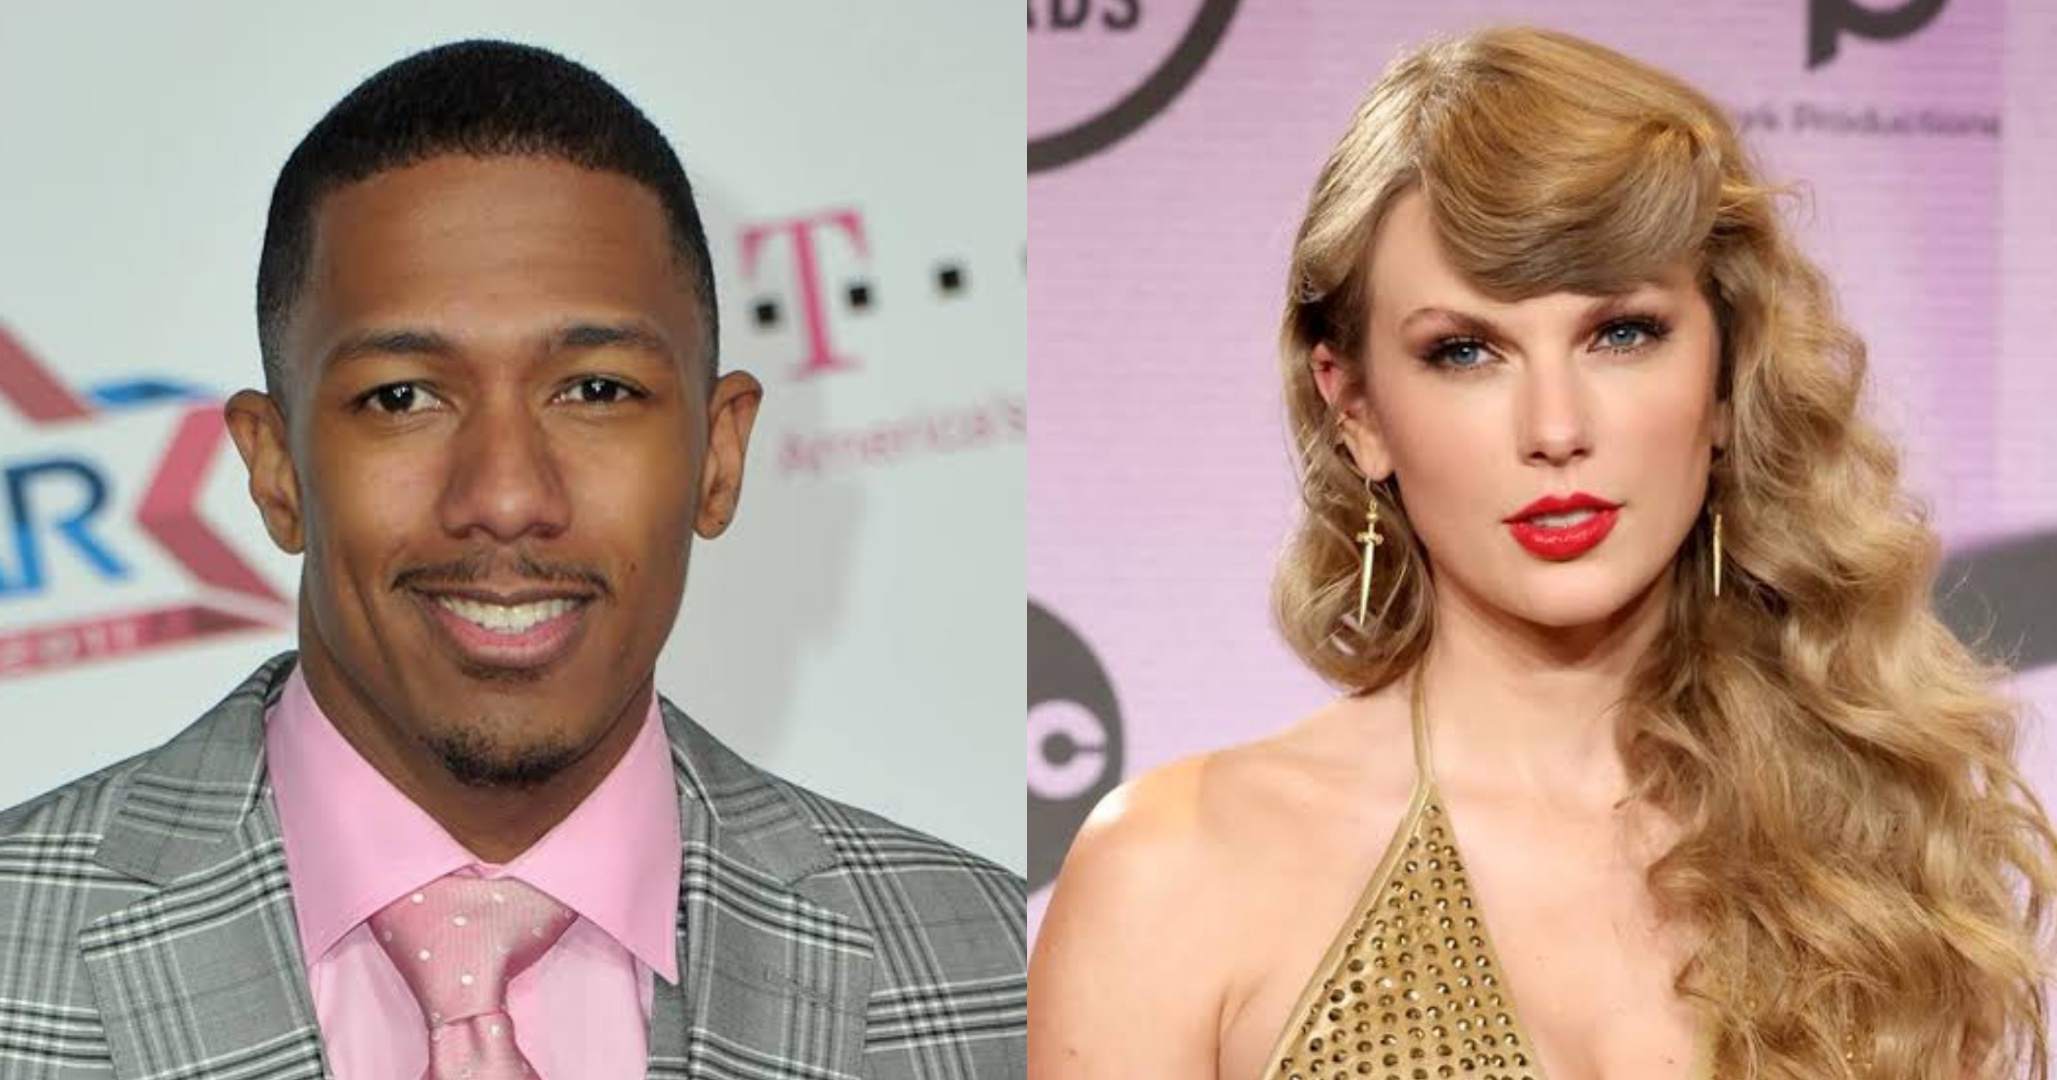 Nick Cannon speaks on desire to have 13th baby with Taylor Swift